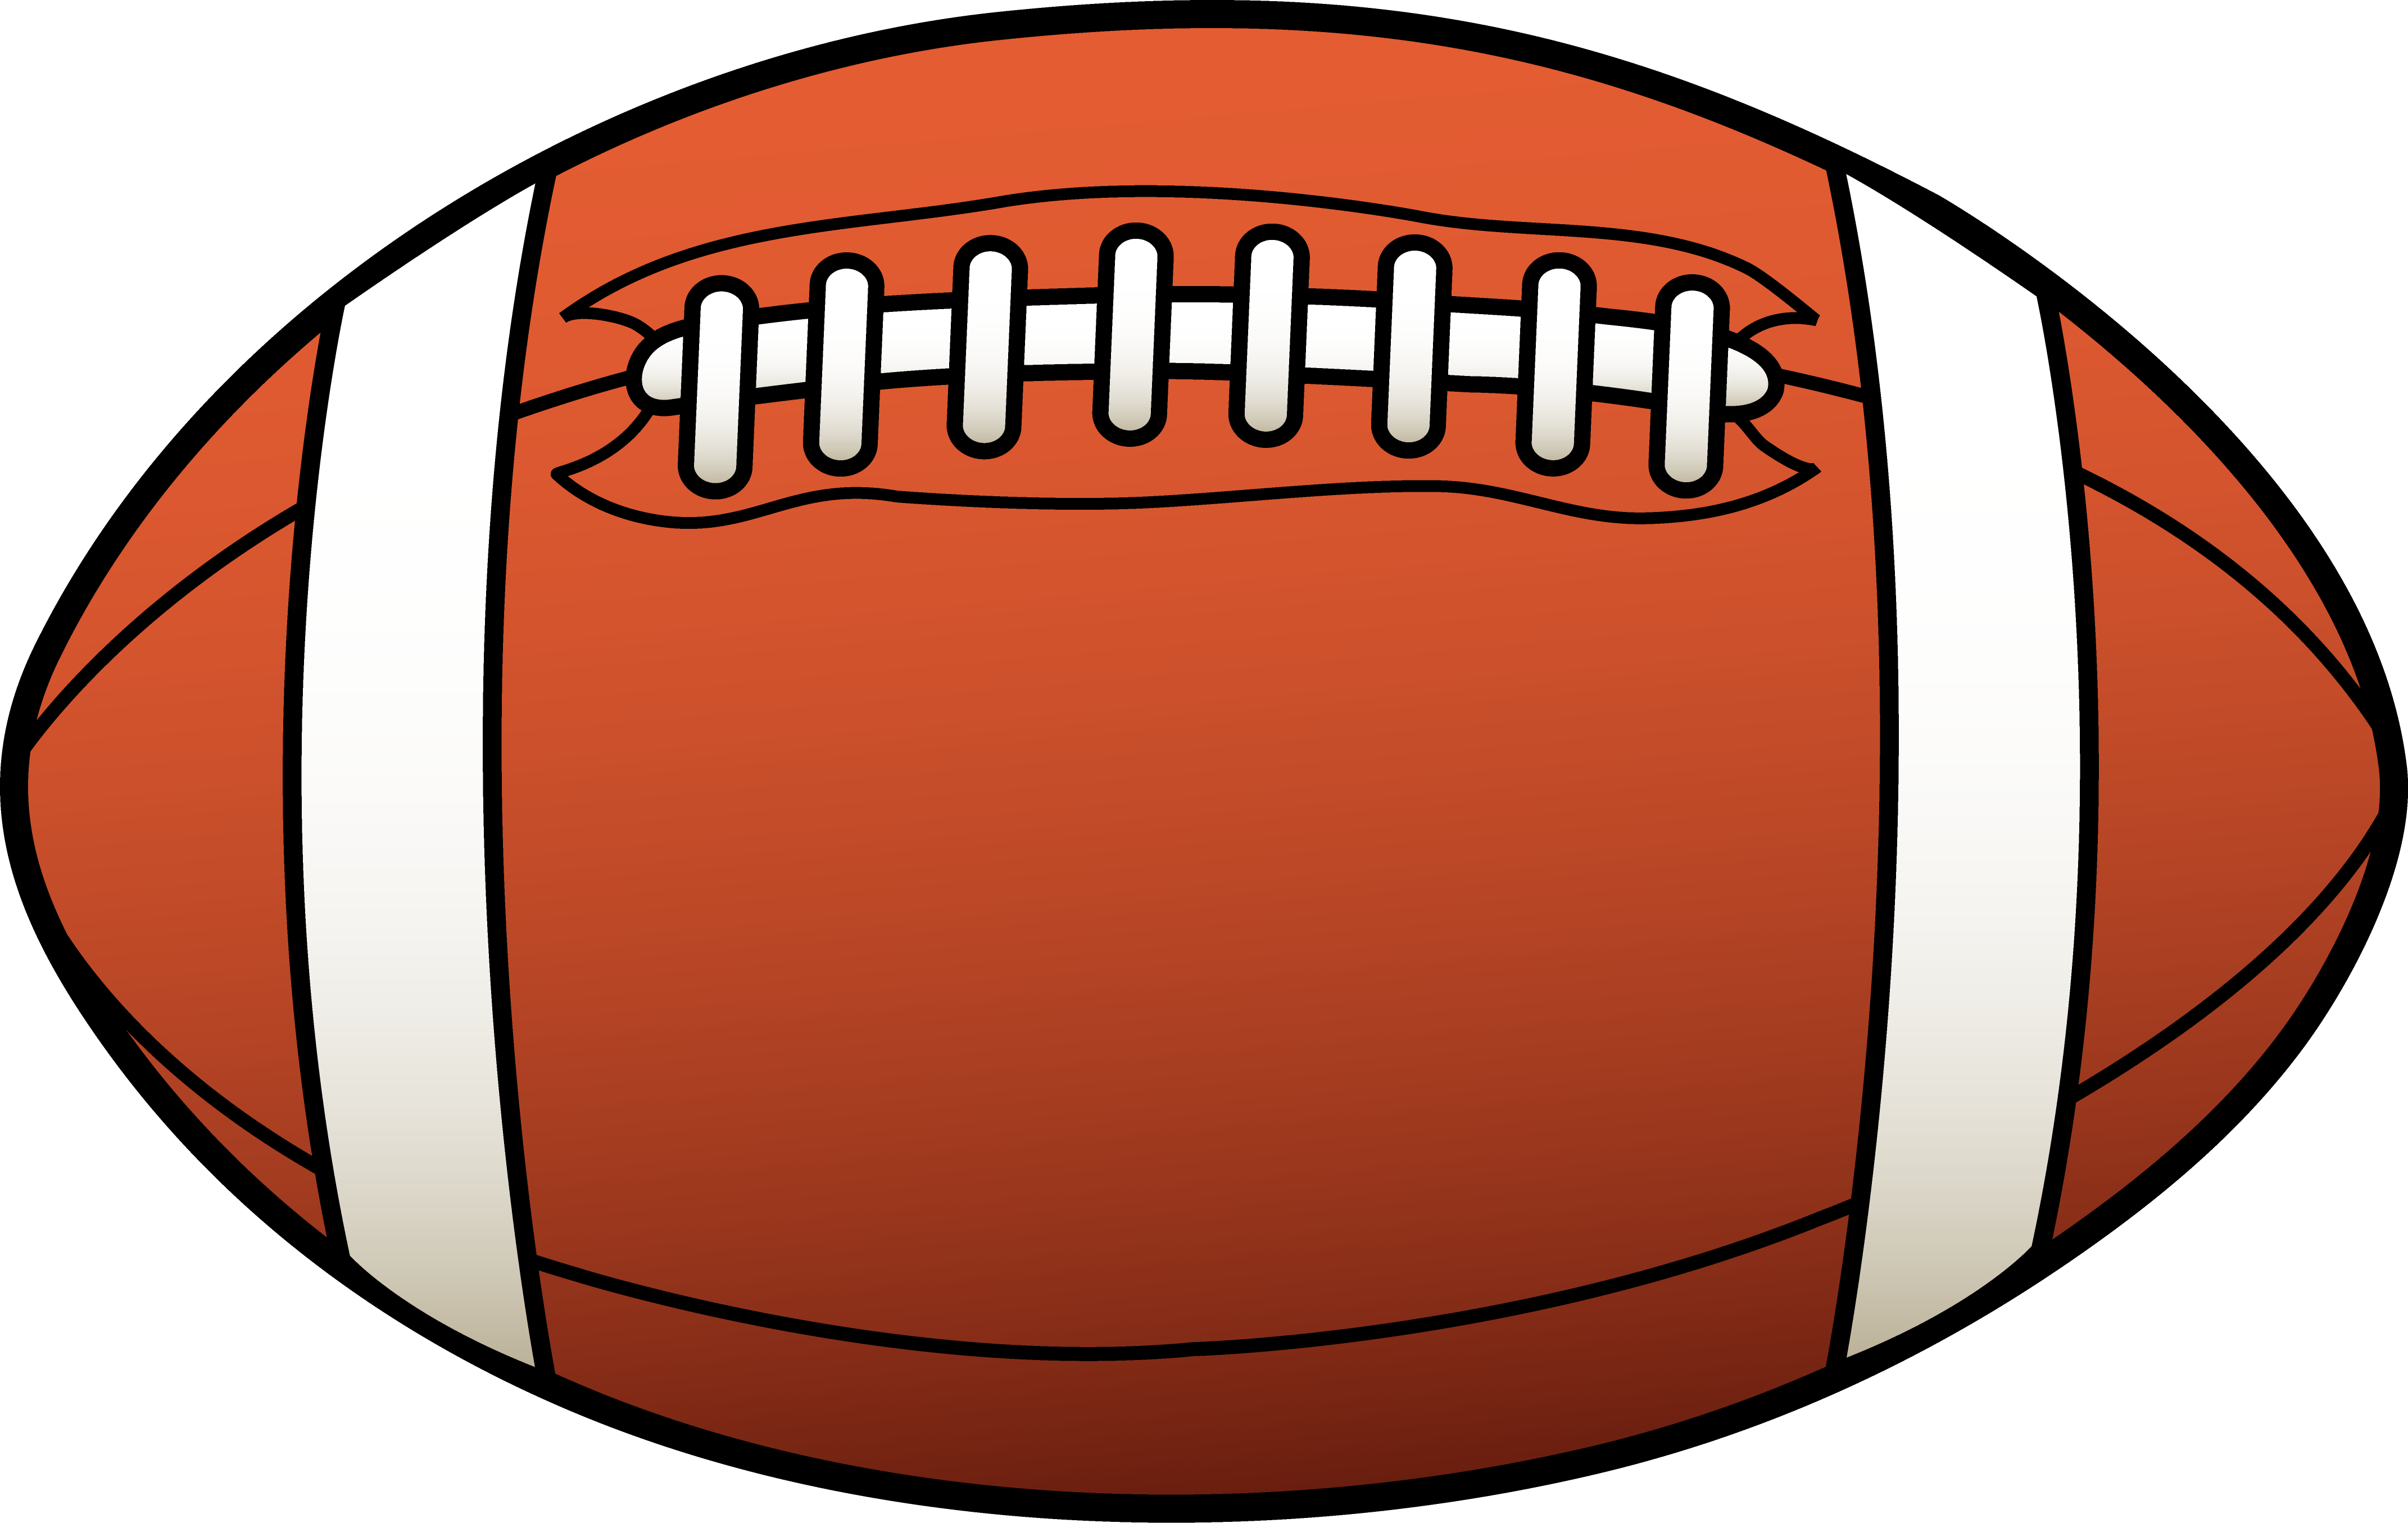 Free Football Clipart And Logos | Clipart Panda - Free Clipart Images